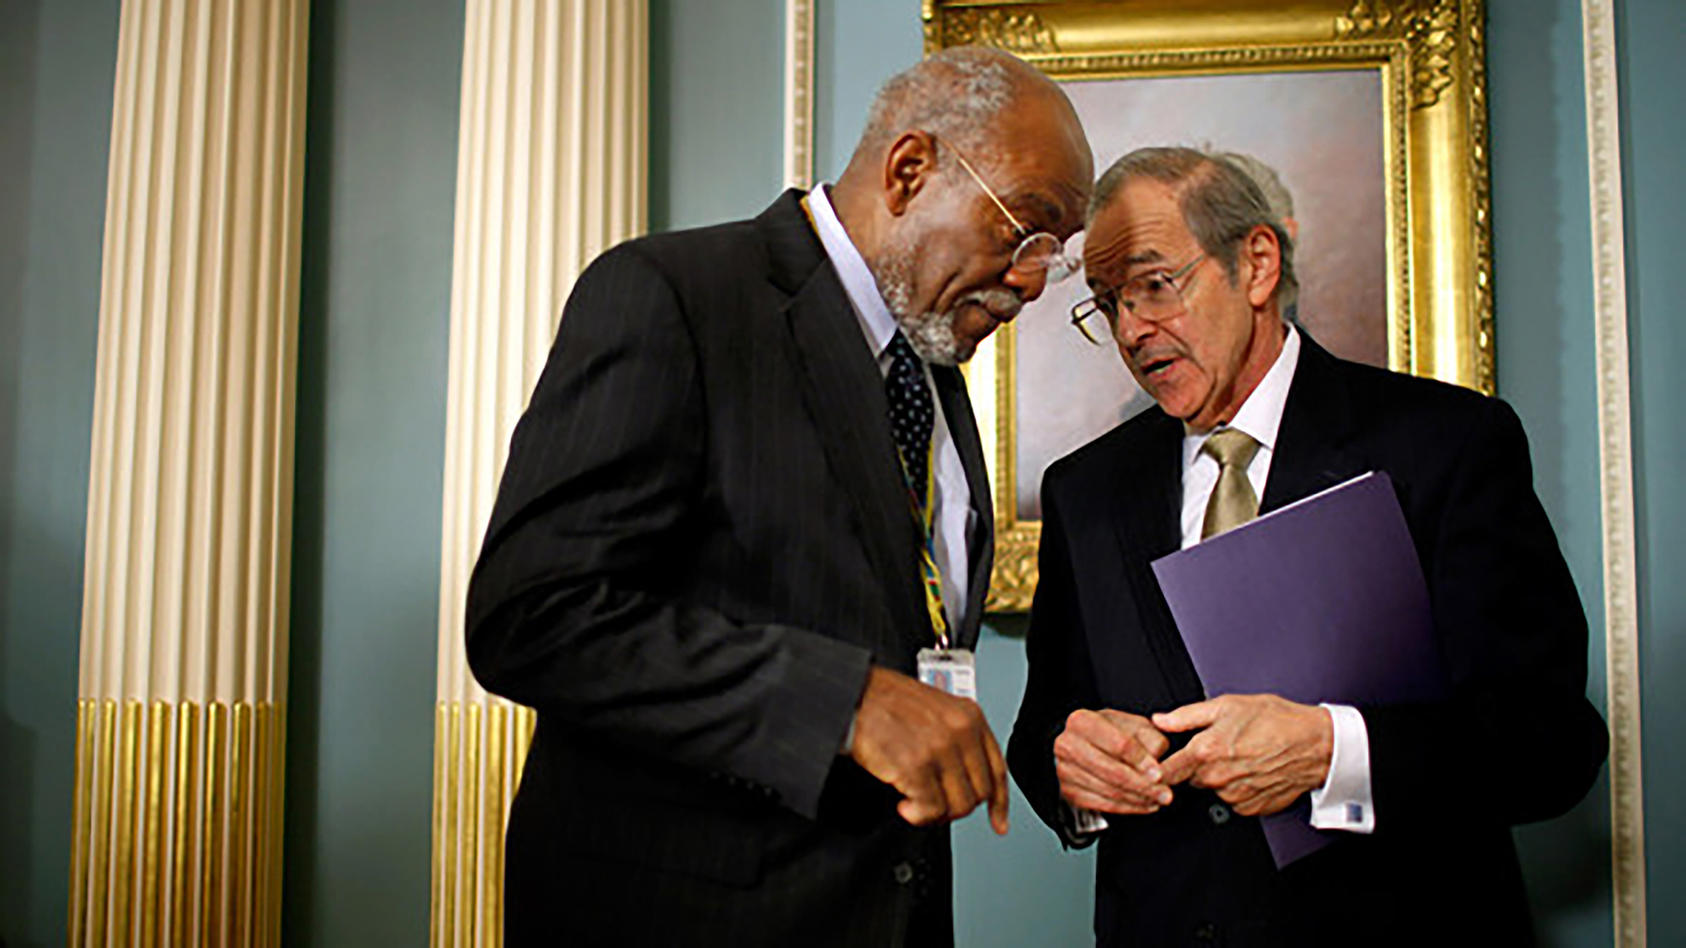 Ambassador Johnnie Carson and Ambassador Princeton Lyman in conversation shortly after Lyman was named special envoy to Sudan, March 31, 2011.